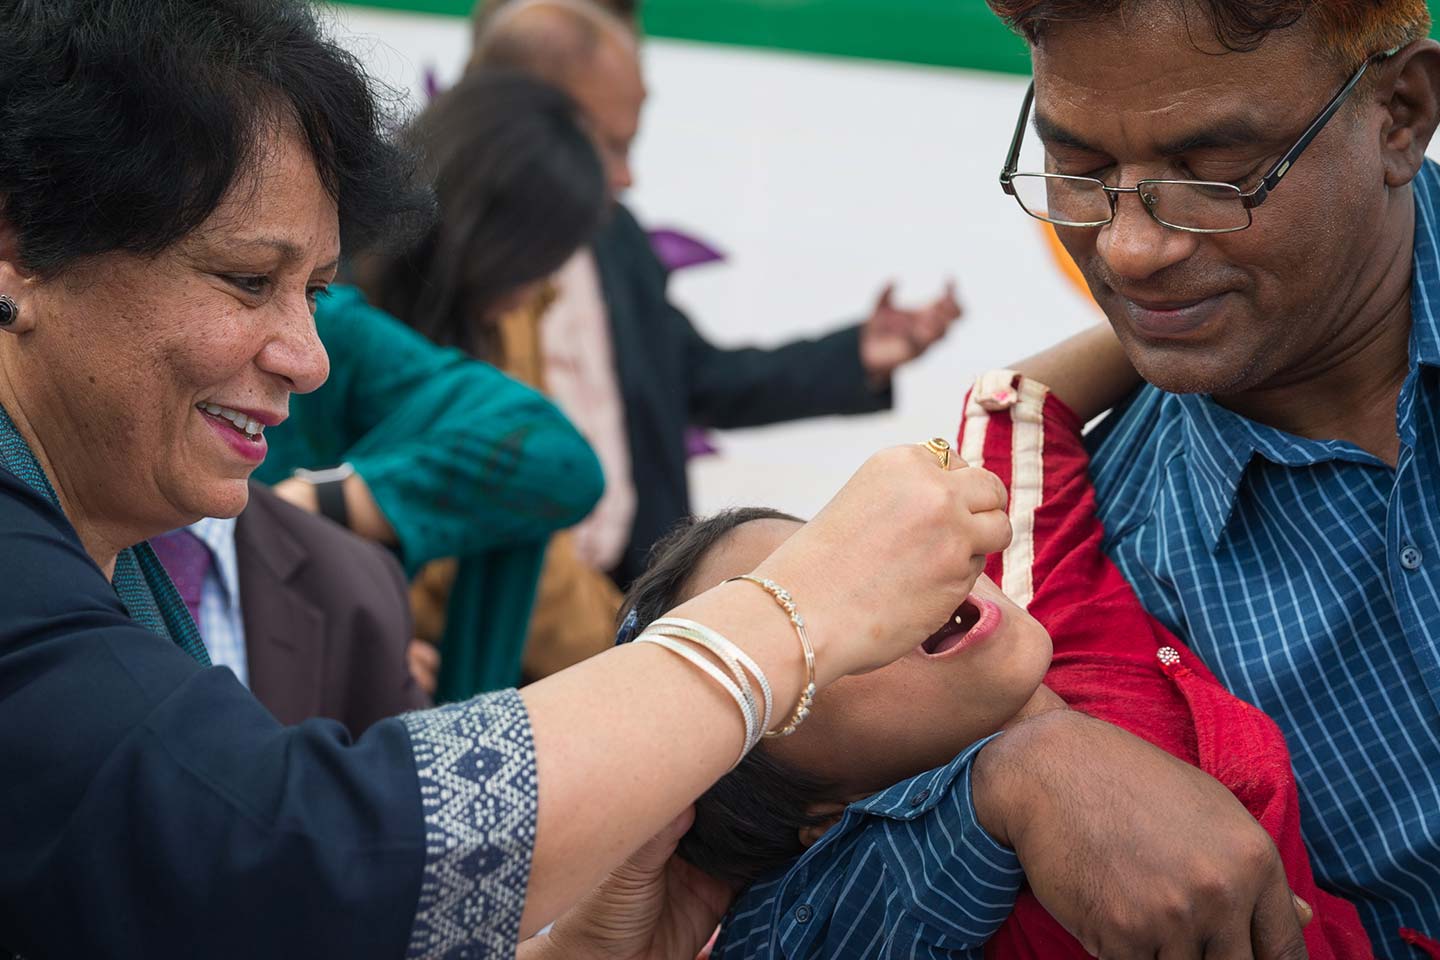 Anuradha Gupta, Deputy CEO of Gavi, the Vaccine Alliance gives oral cholera vaccine (OCV) drops to a child at the launch of the December 2019 vaccination campaign in Cox’s Bazar, Bangladesh. ©Gavi/2019/Isaac Griberg